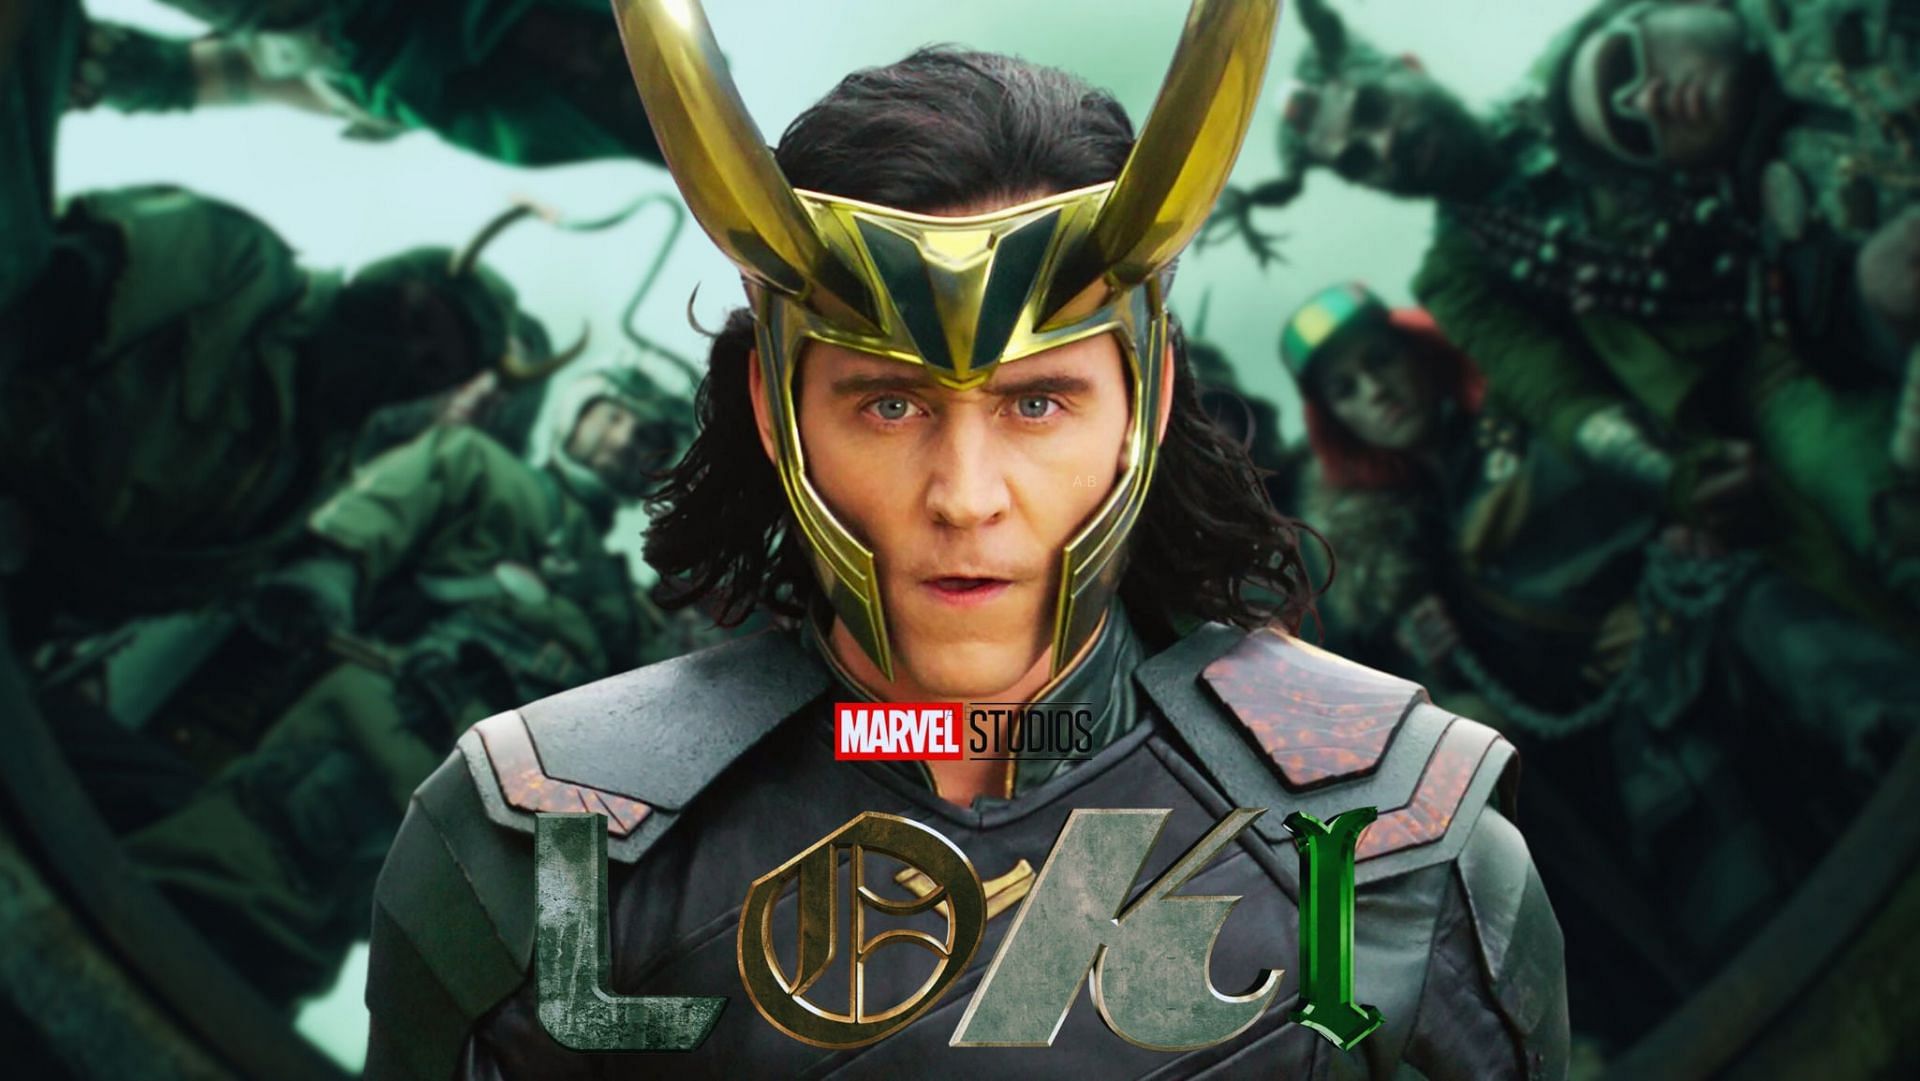 Marvel Studios pioneers an unconventional directorial lineup for Loki Season 2, signaling a bold new chapter in the MCU (Image via Sportskeeda)